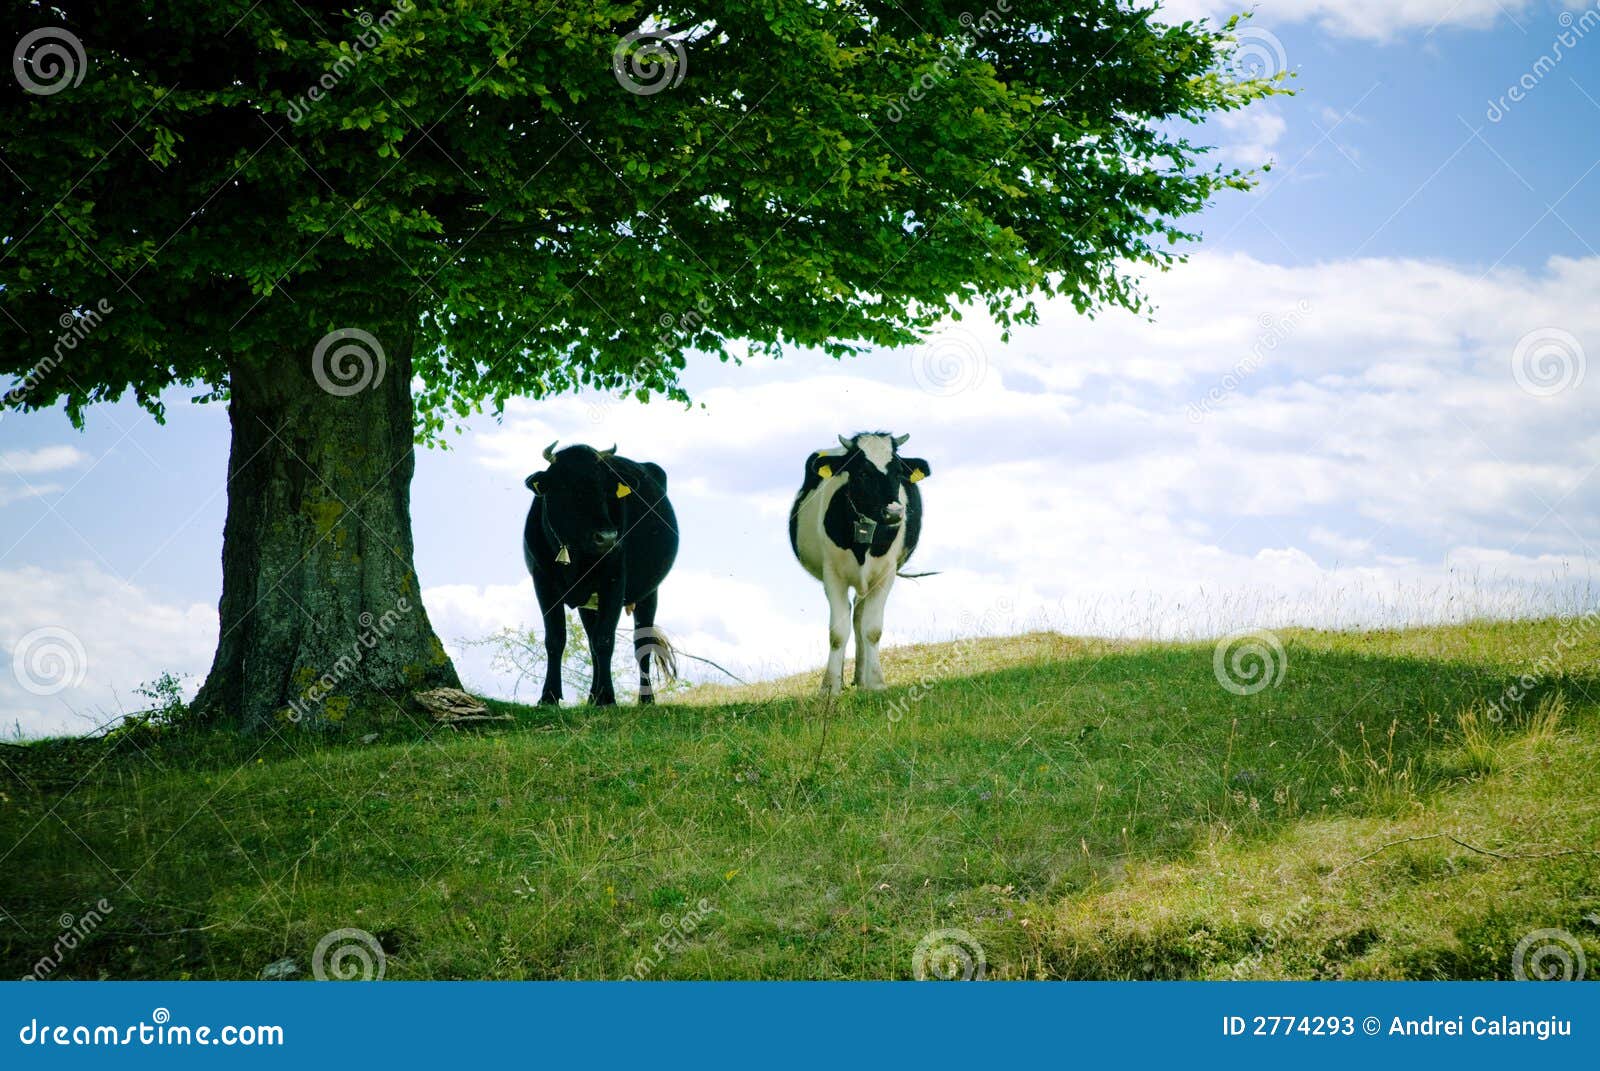 cows in shade